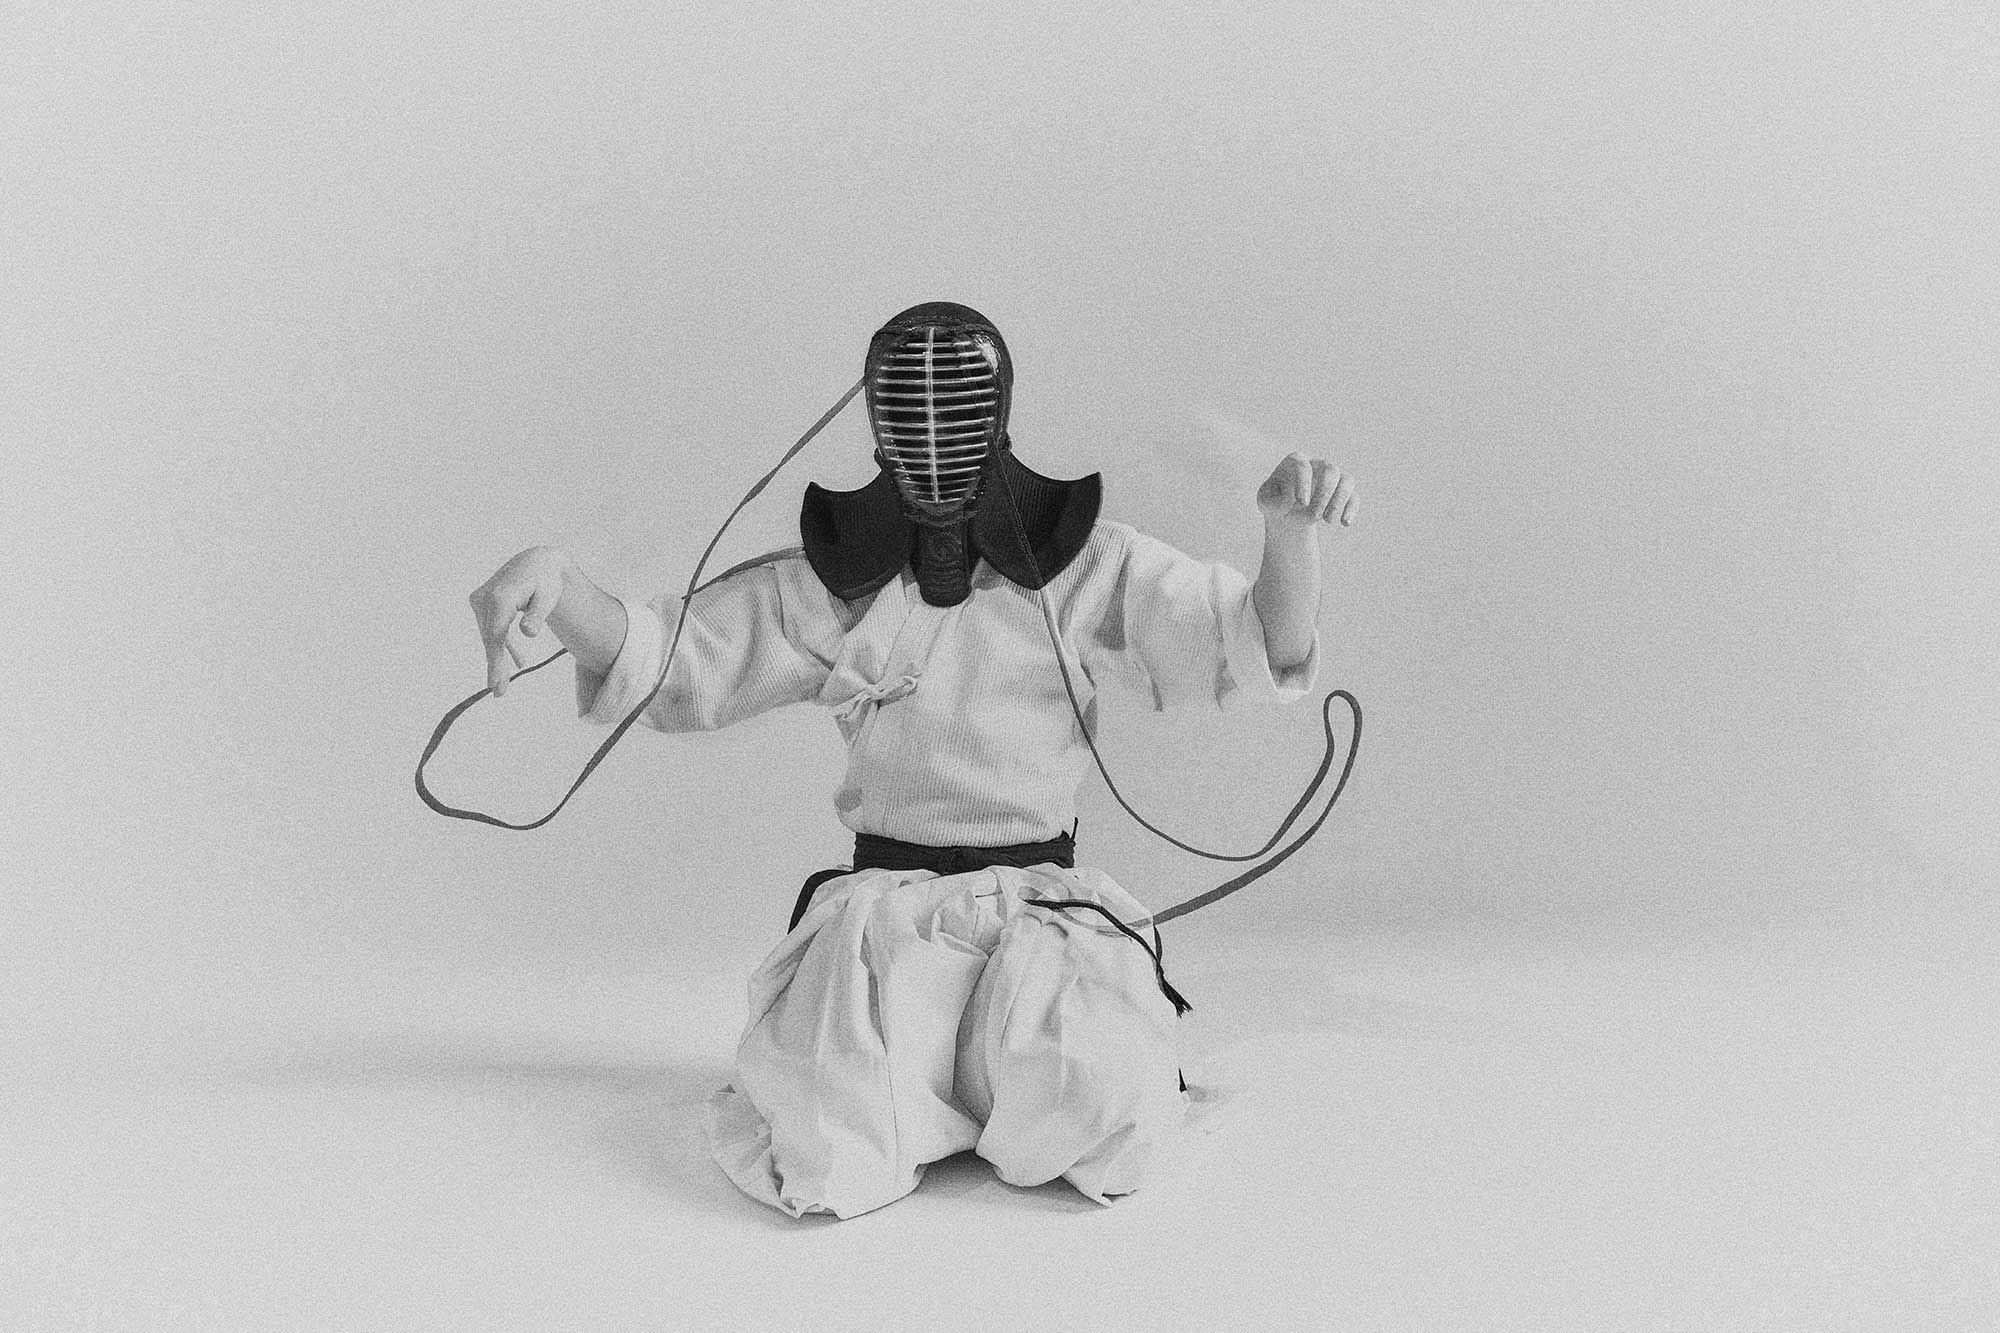 Black and white imagery of Kendo Modern Japanese Martial Art in studio, exploring a new angles on Kendo Martial Arts.